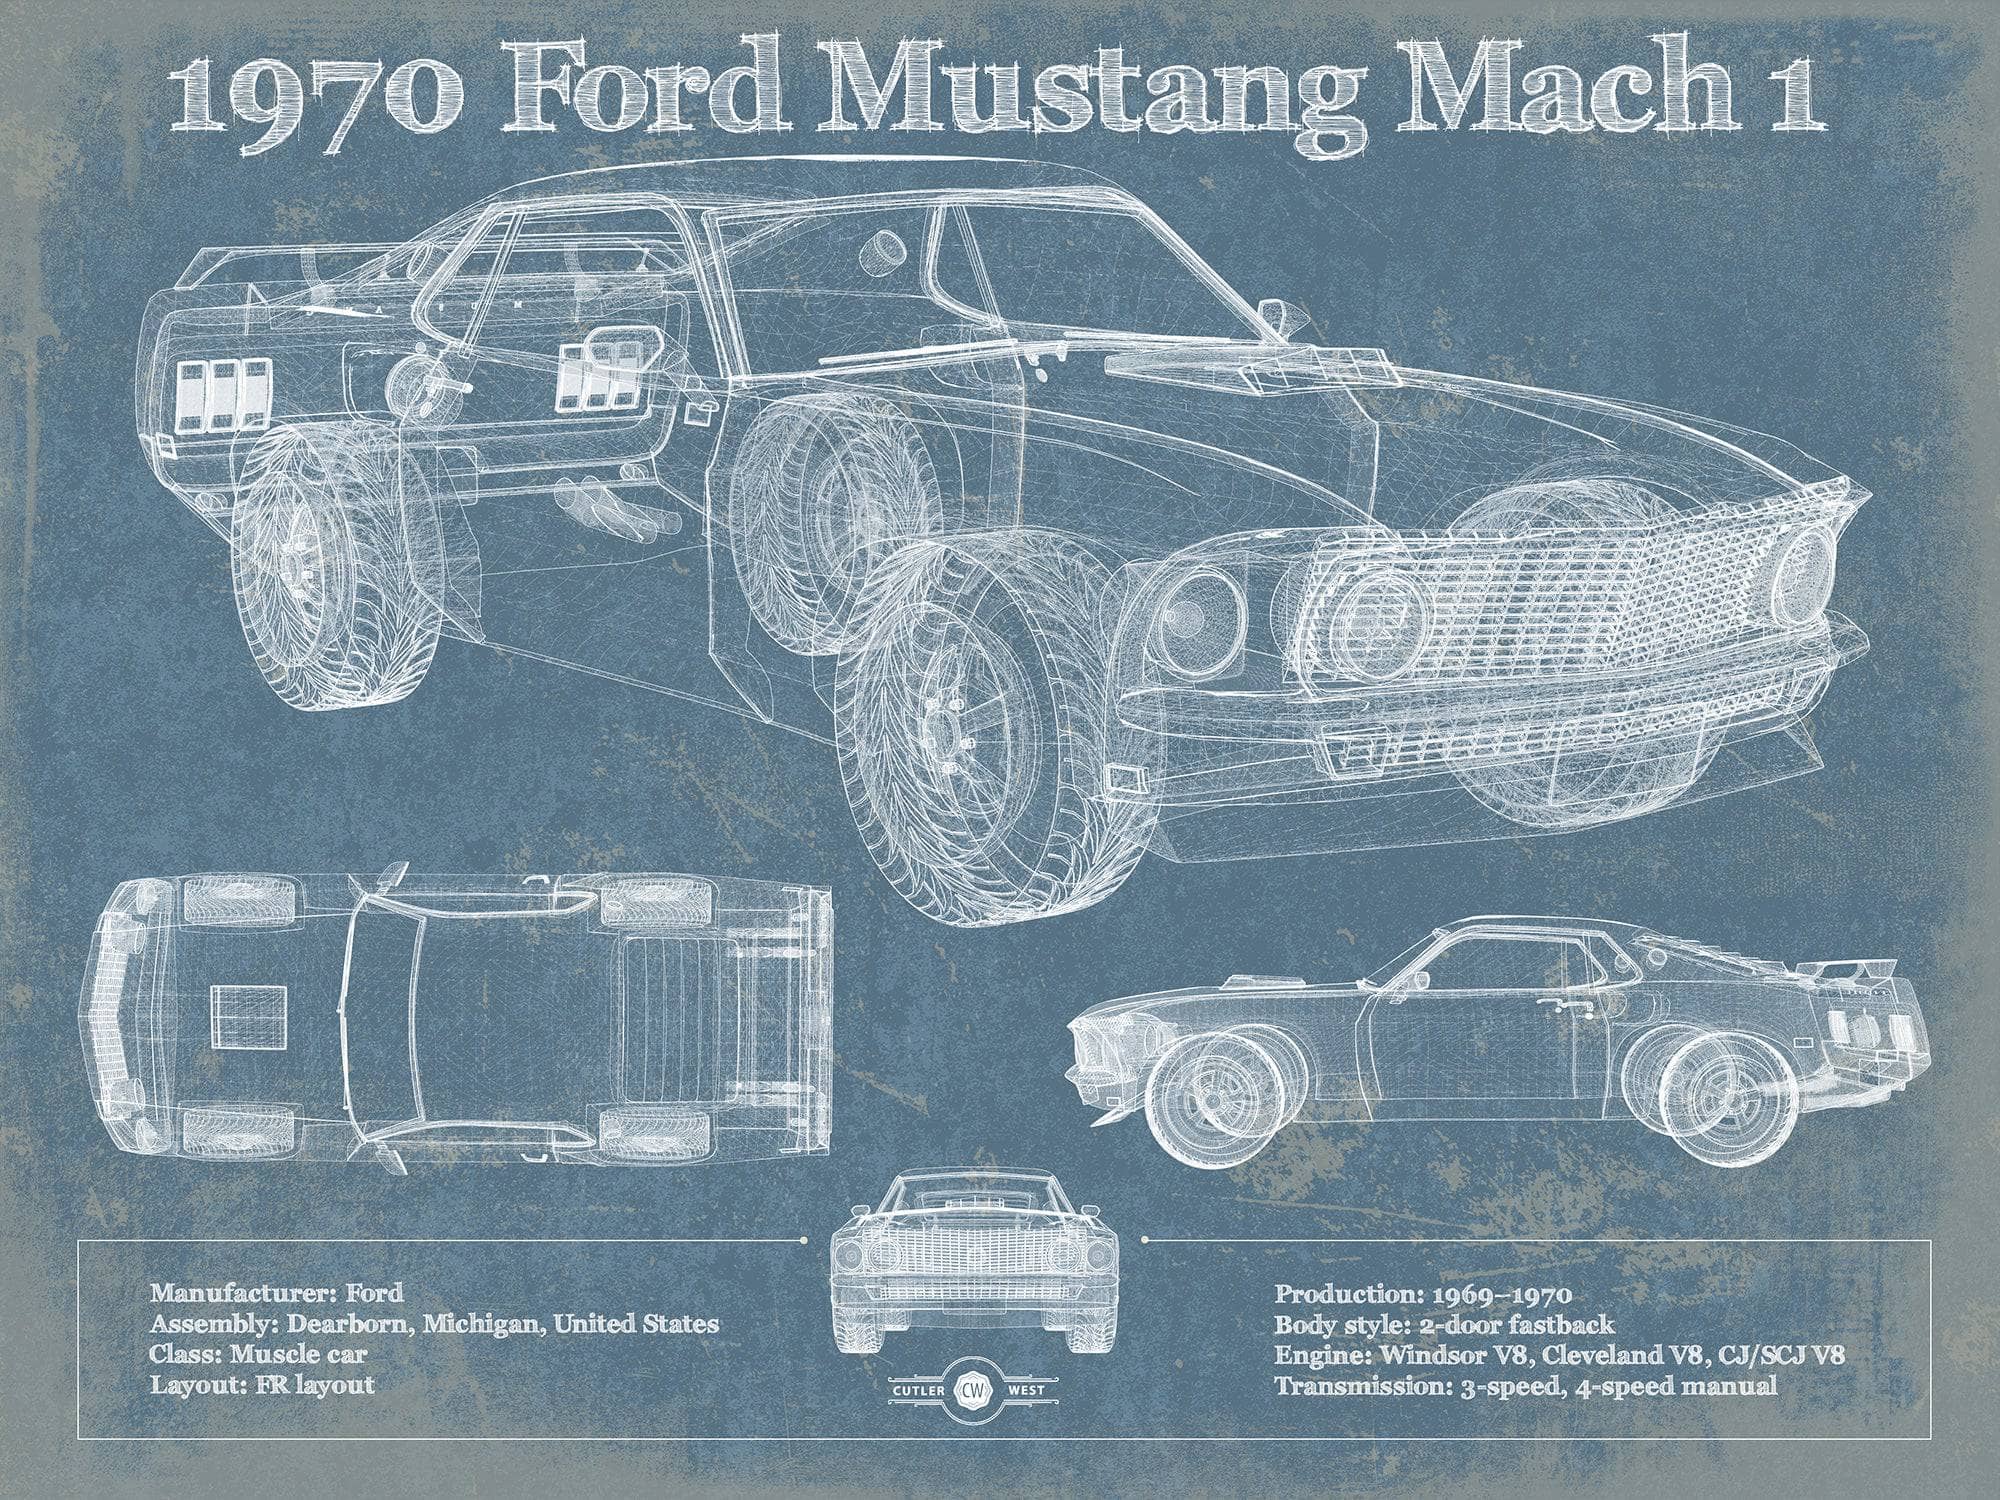 1970 Ford Mustang Mach 1 Vintage Blueprint Auto Print